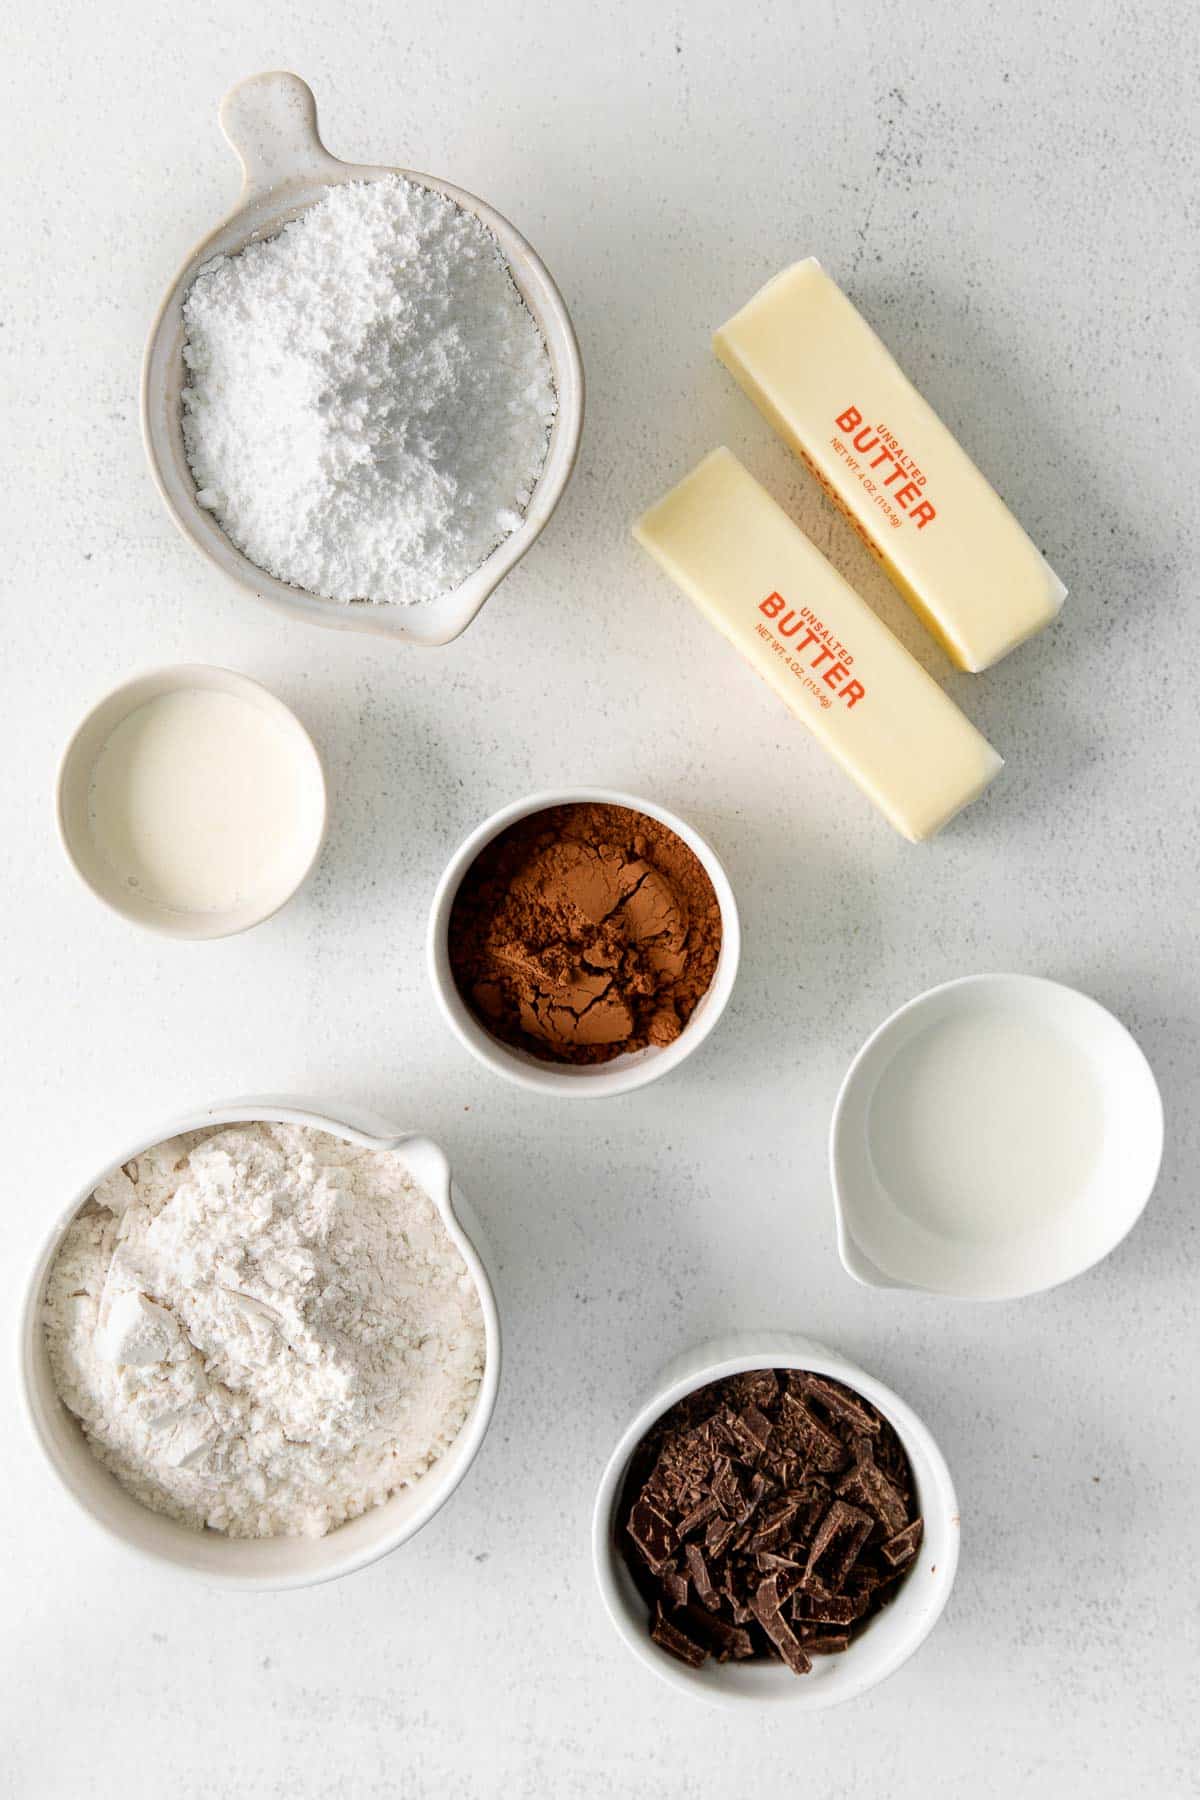 several small bowls with ingredients for chocolate cookies - flour, powdered sugar, cocoa powder, chocolate shavings, milk, two sticks of butter.